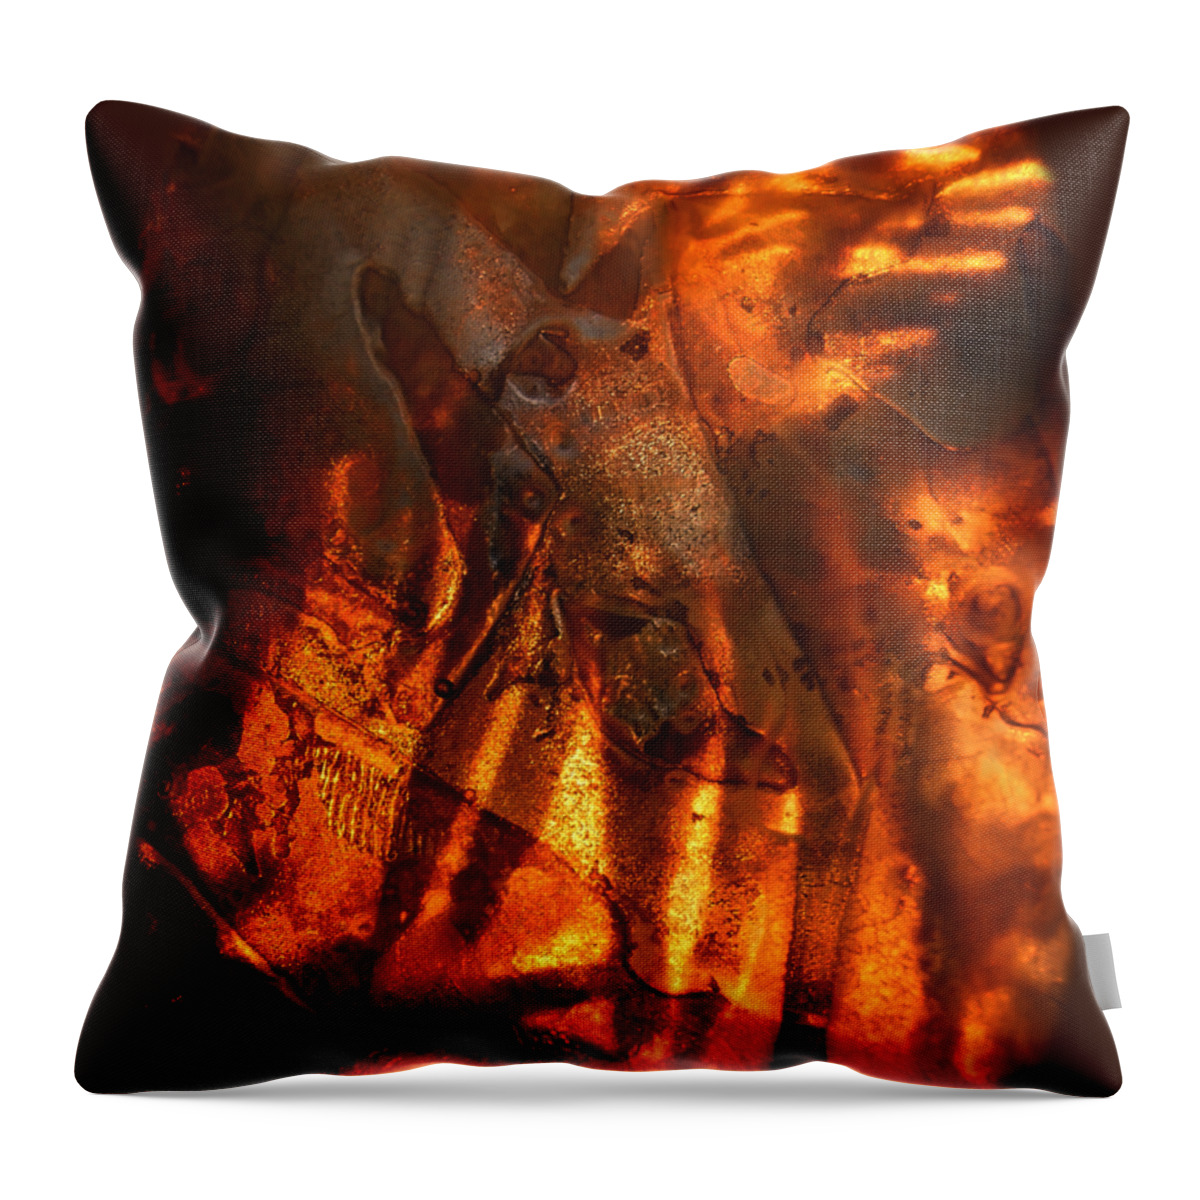 Abstract Throw Pillow featuring the photograph Revelation by Sami Tiainen